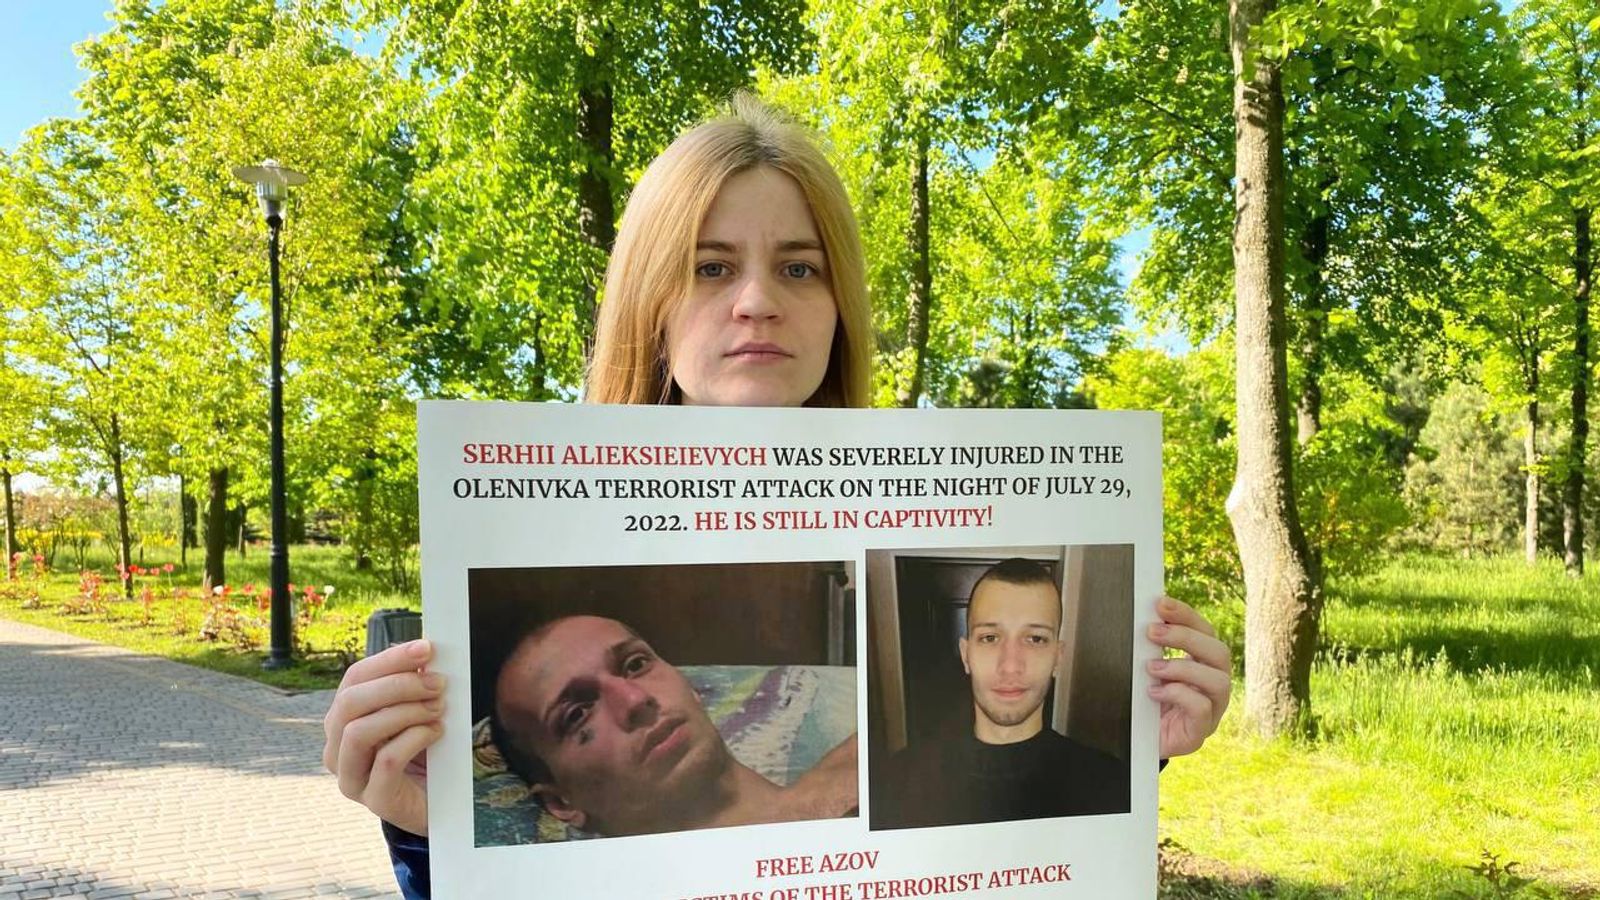 Mariia Alieksieievych has been fighting to get her husband back from captivity